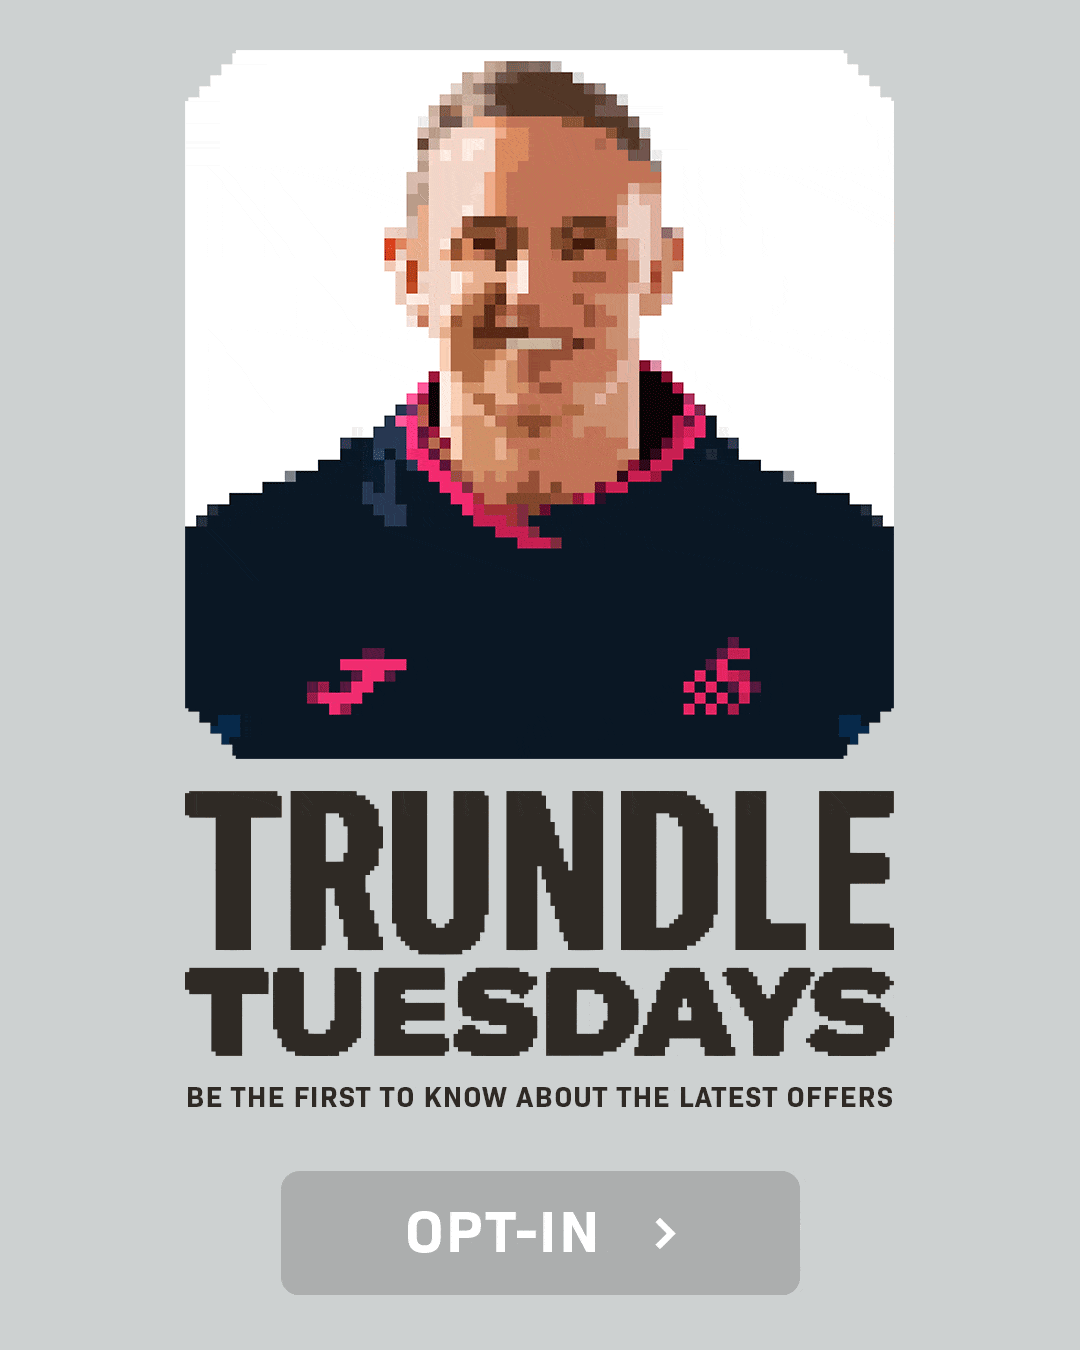 Trundle Tuesday's are back, opt-in to be notified of the Tuesday deals!